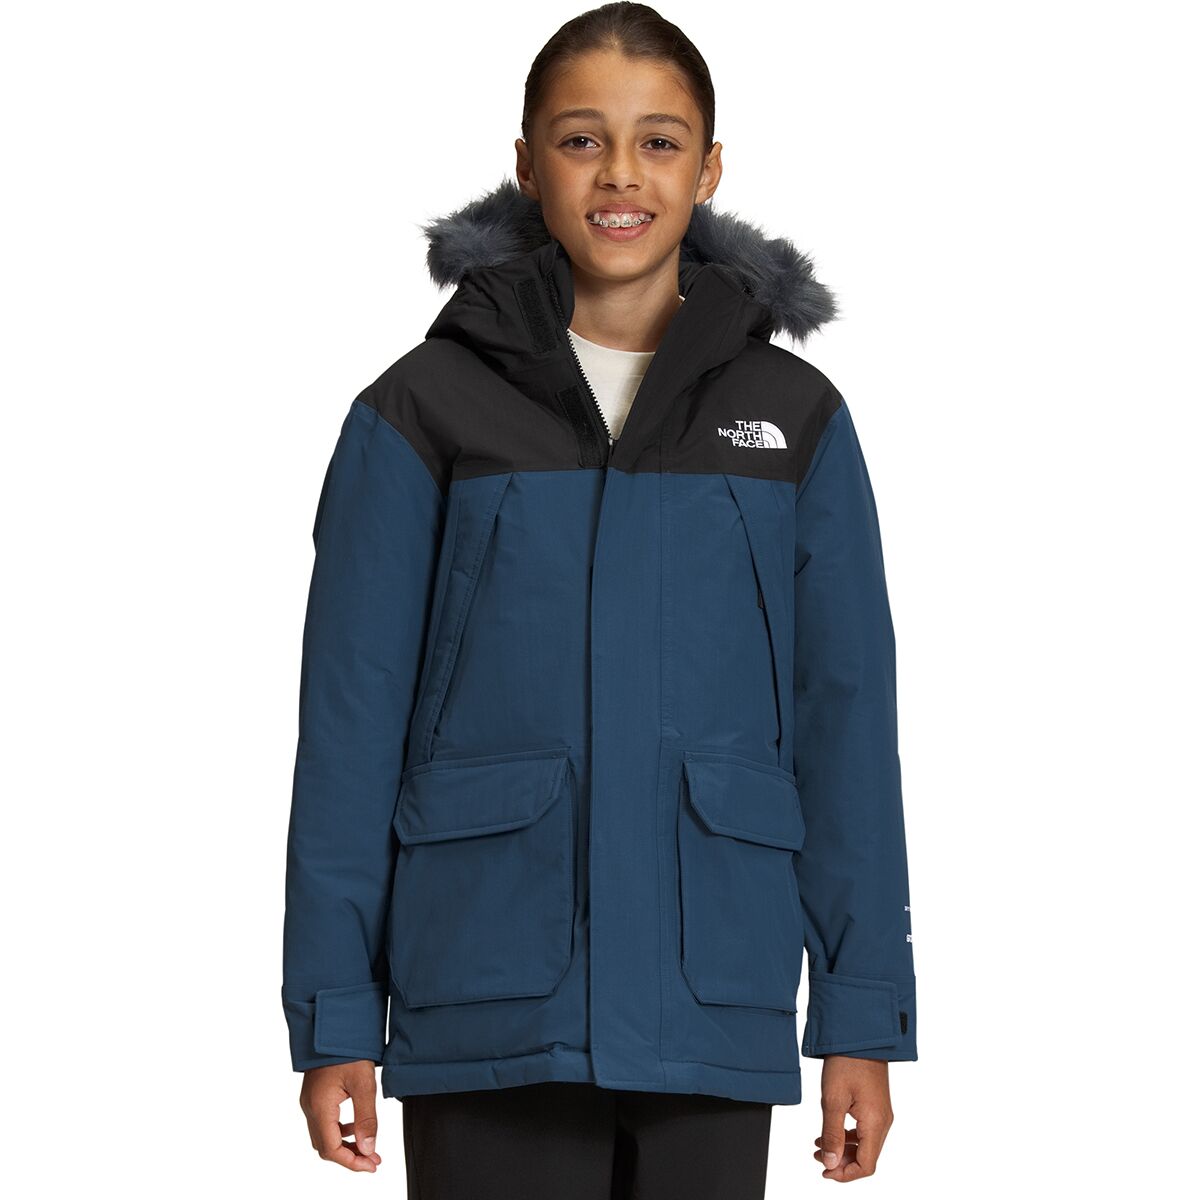 The North Face McMurdo Down Parka - Kids' - Kids